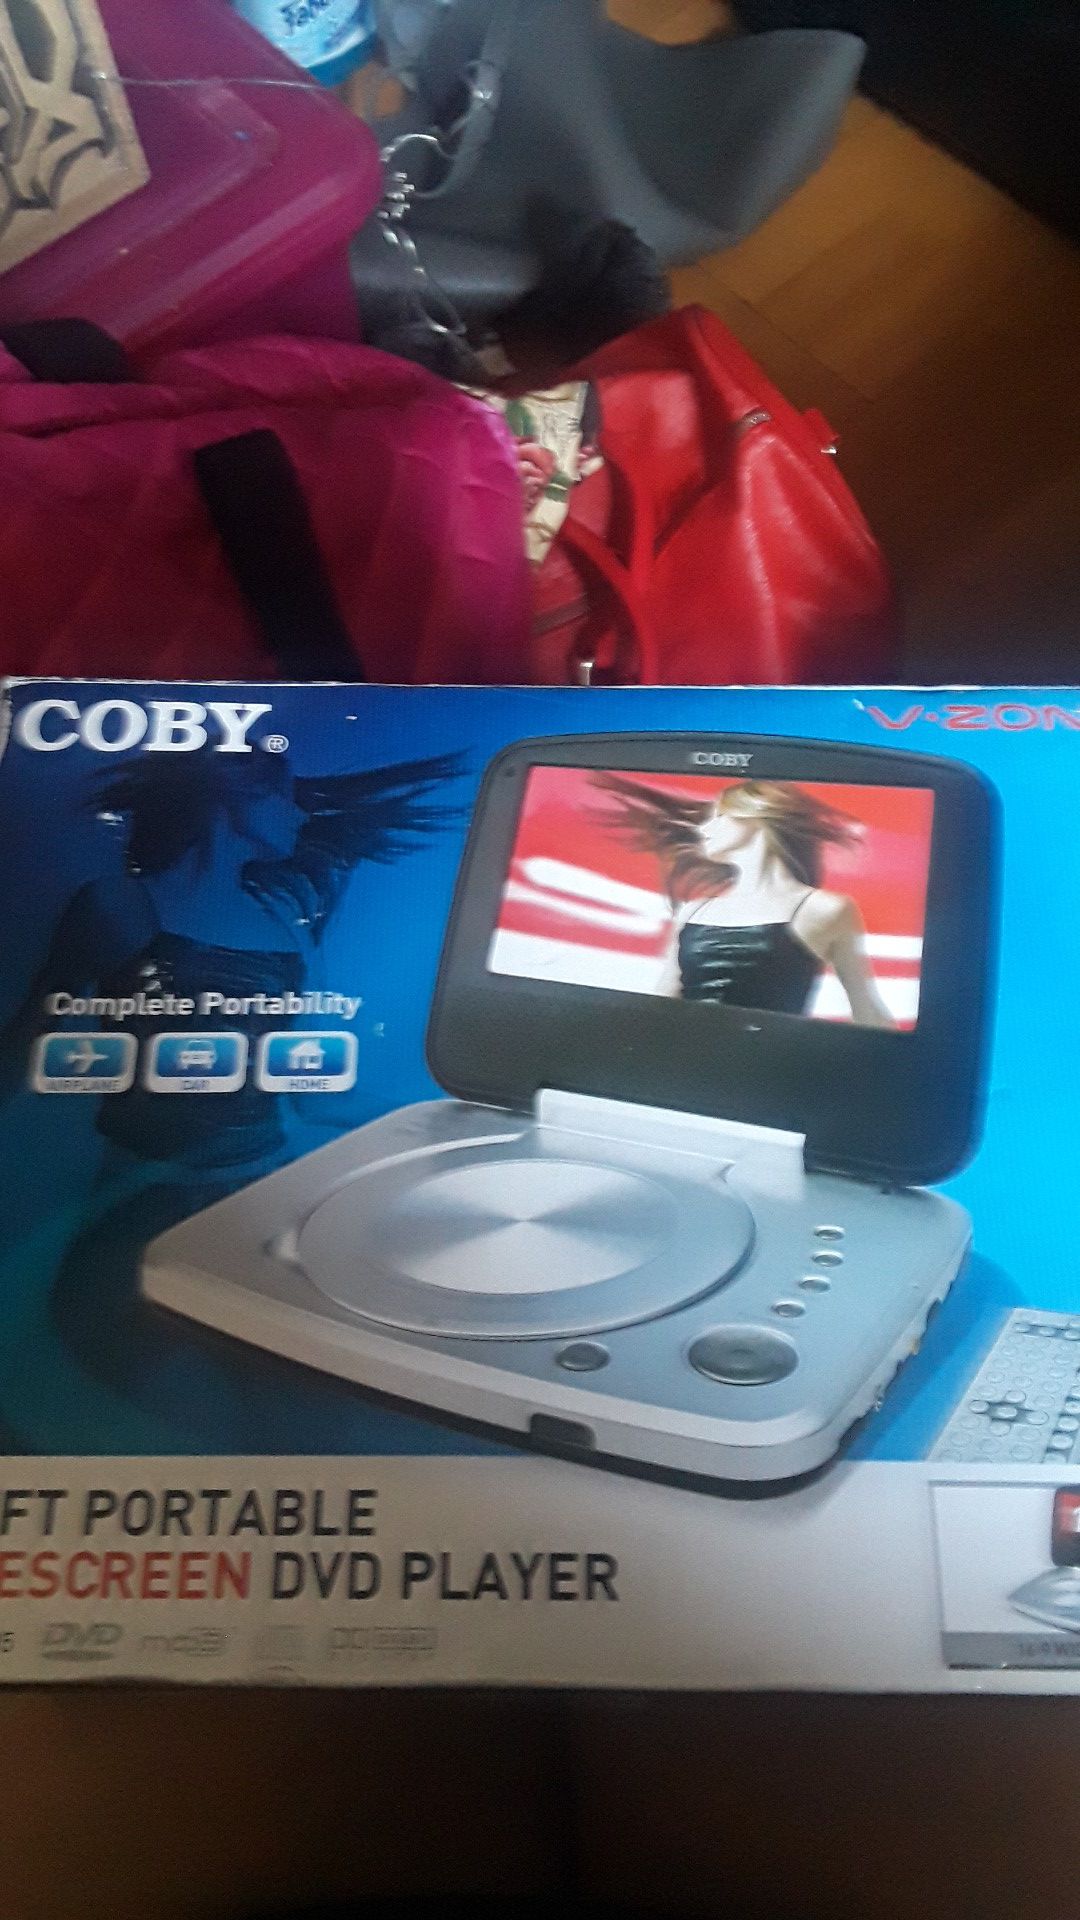 COBY PORTABLE DVD PLAYER